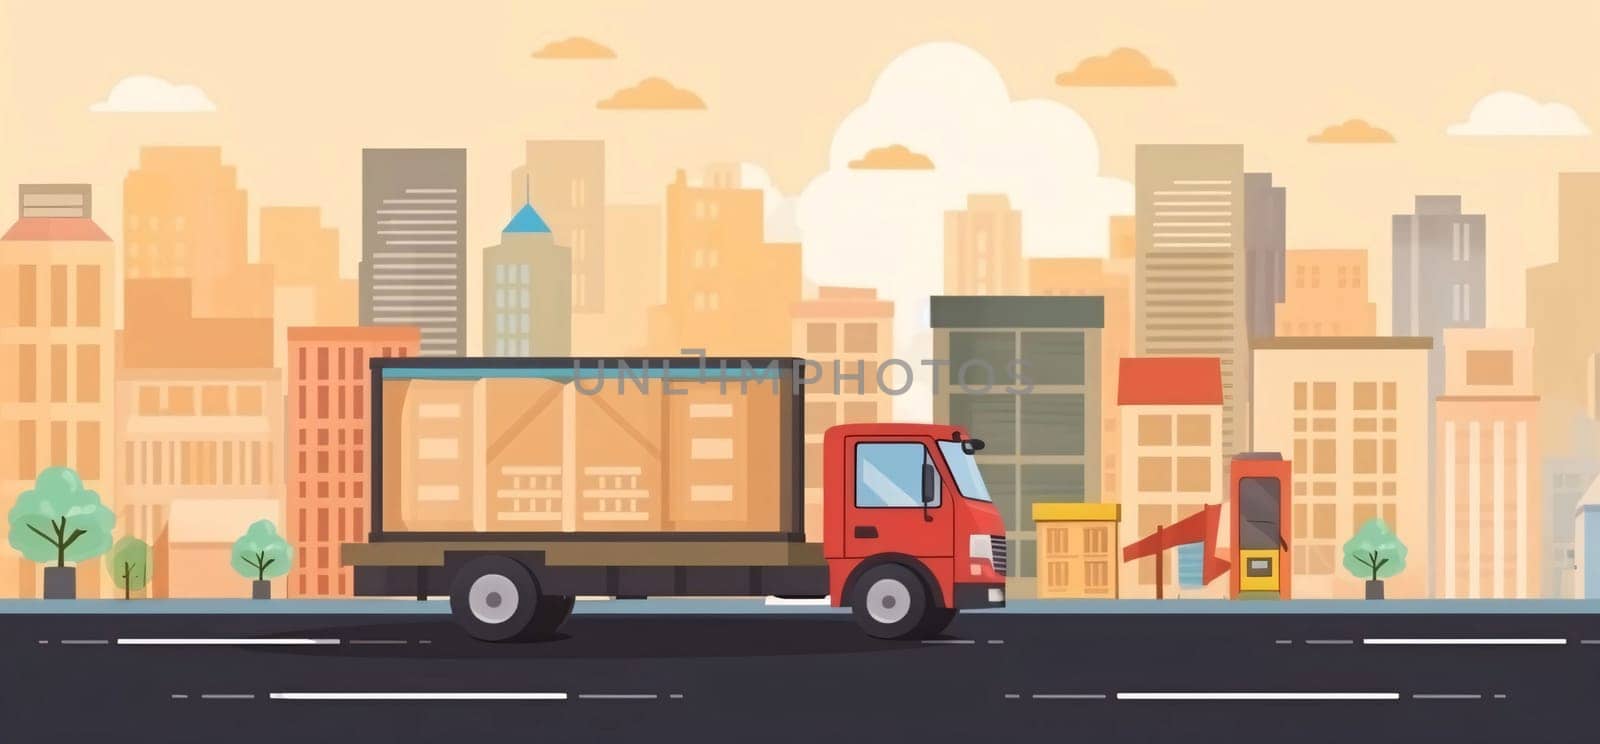 Truck on the road with cityscape background. Vector illustration. by ThemesS